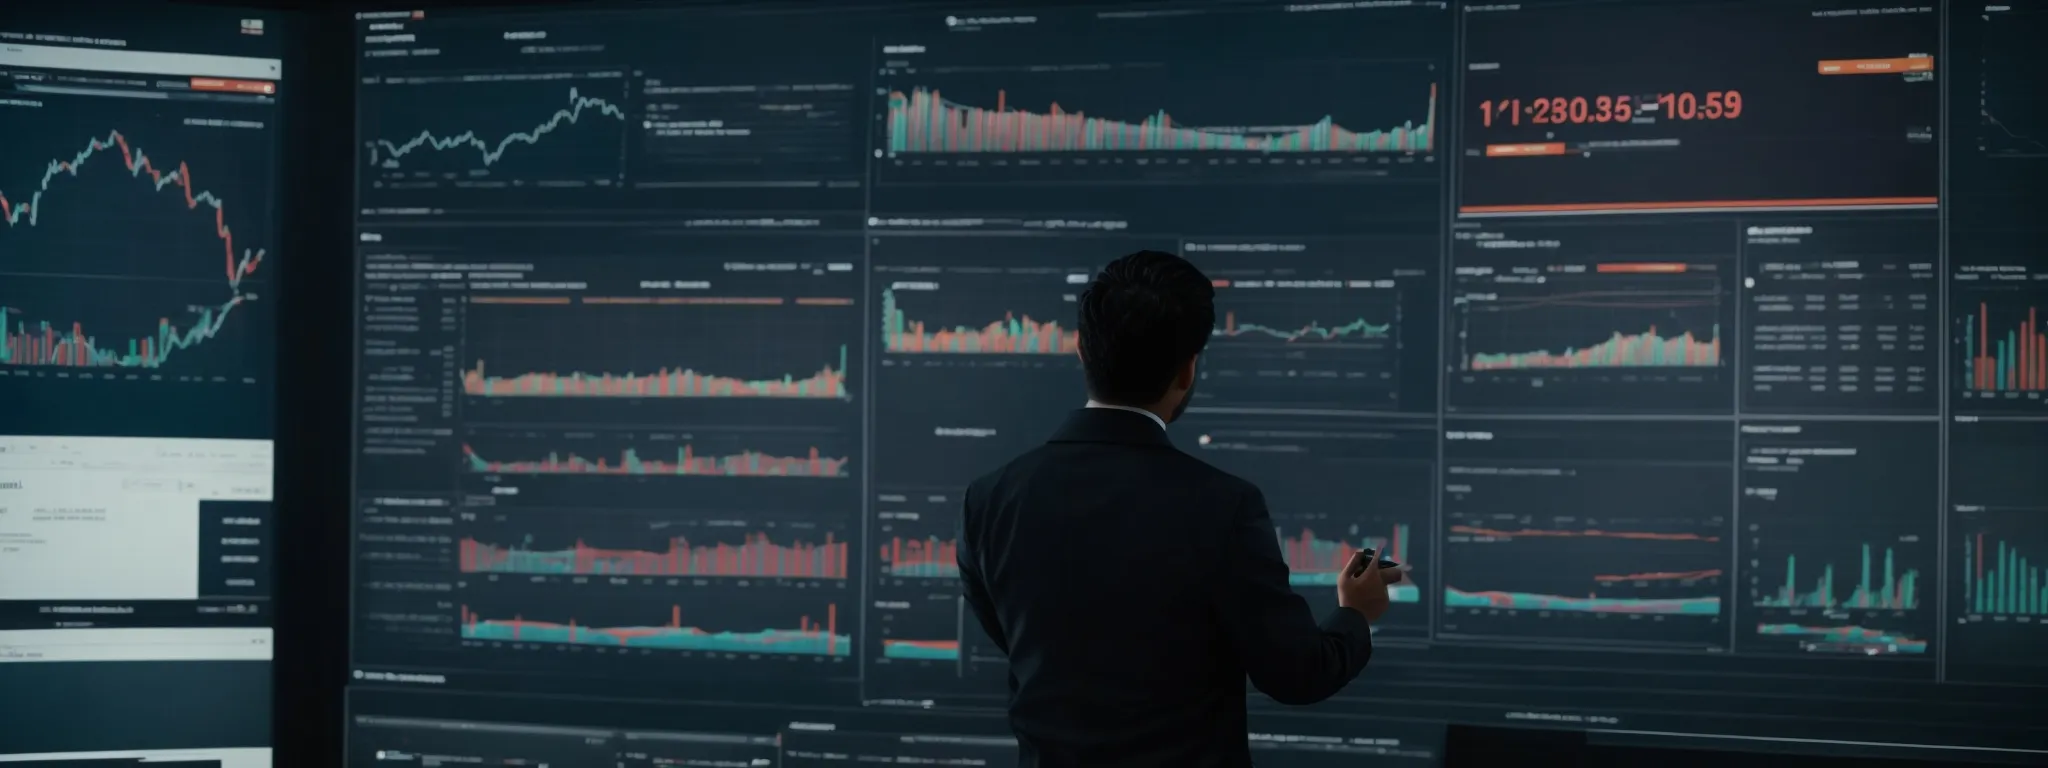 a marketer reviews analytics on a large screen displaying a website's traffic metrics.